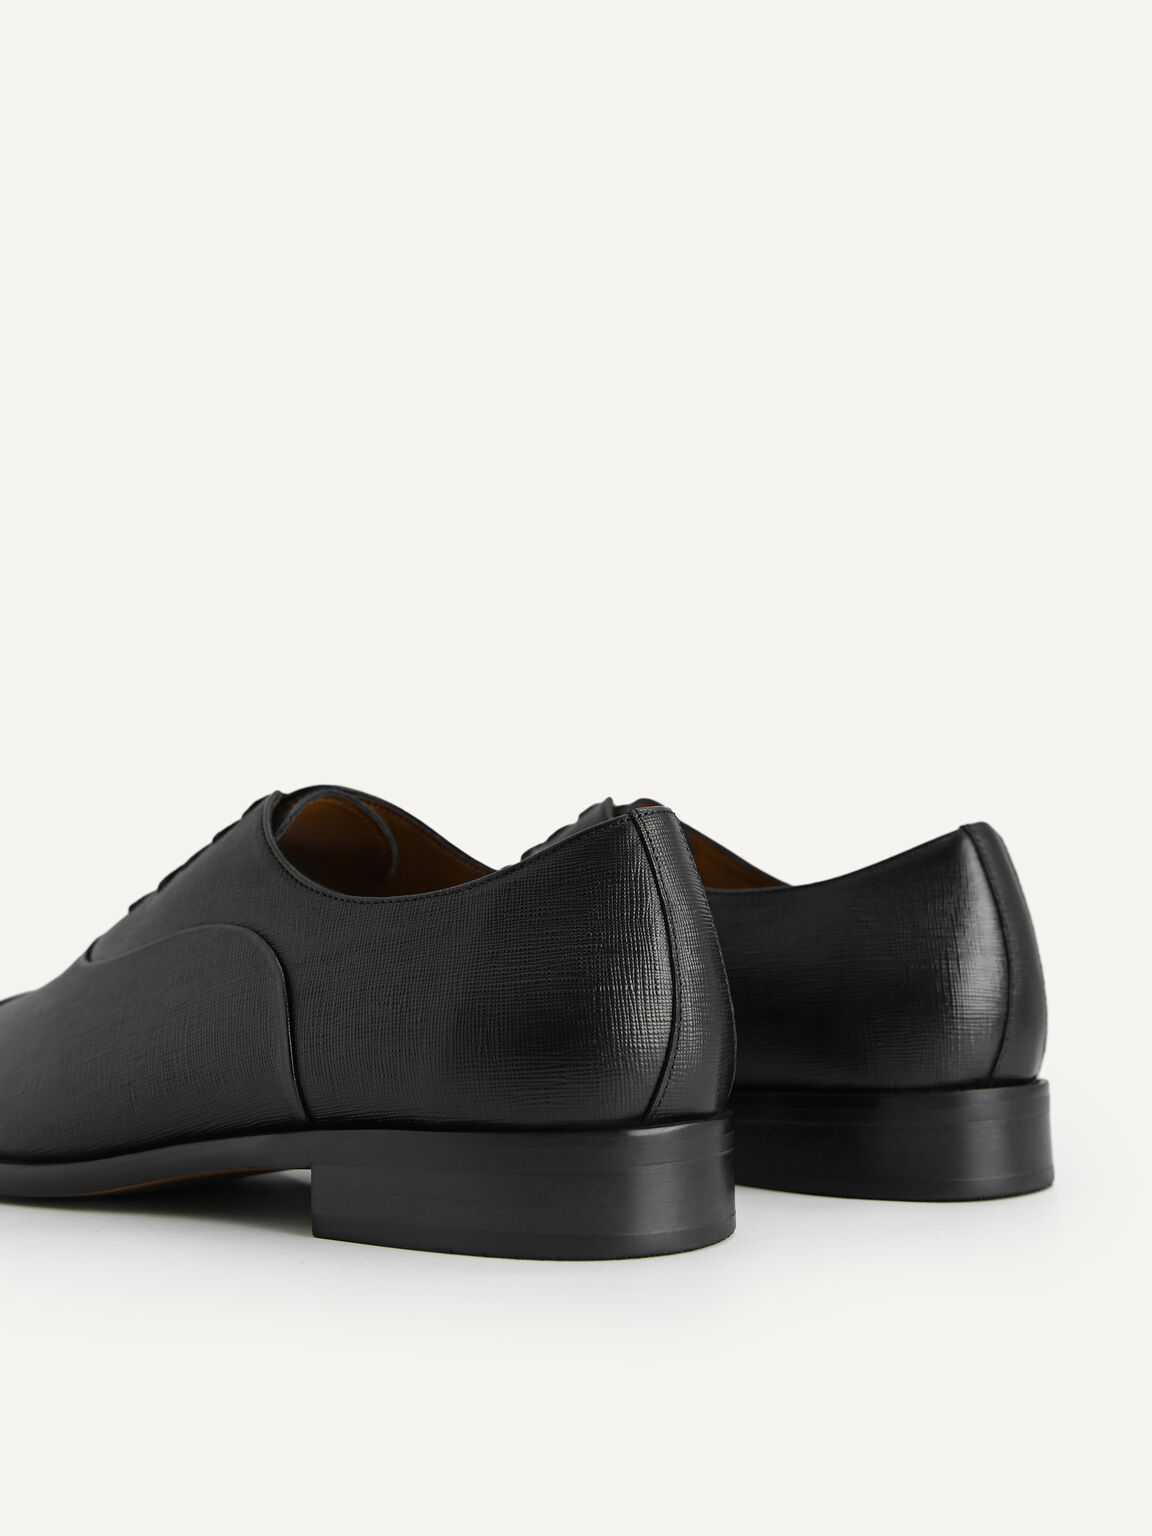 Textured Leather Oxford Shoes, Black, hi-res